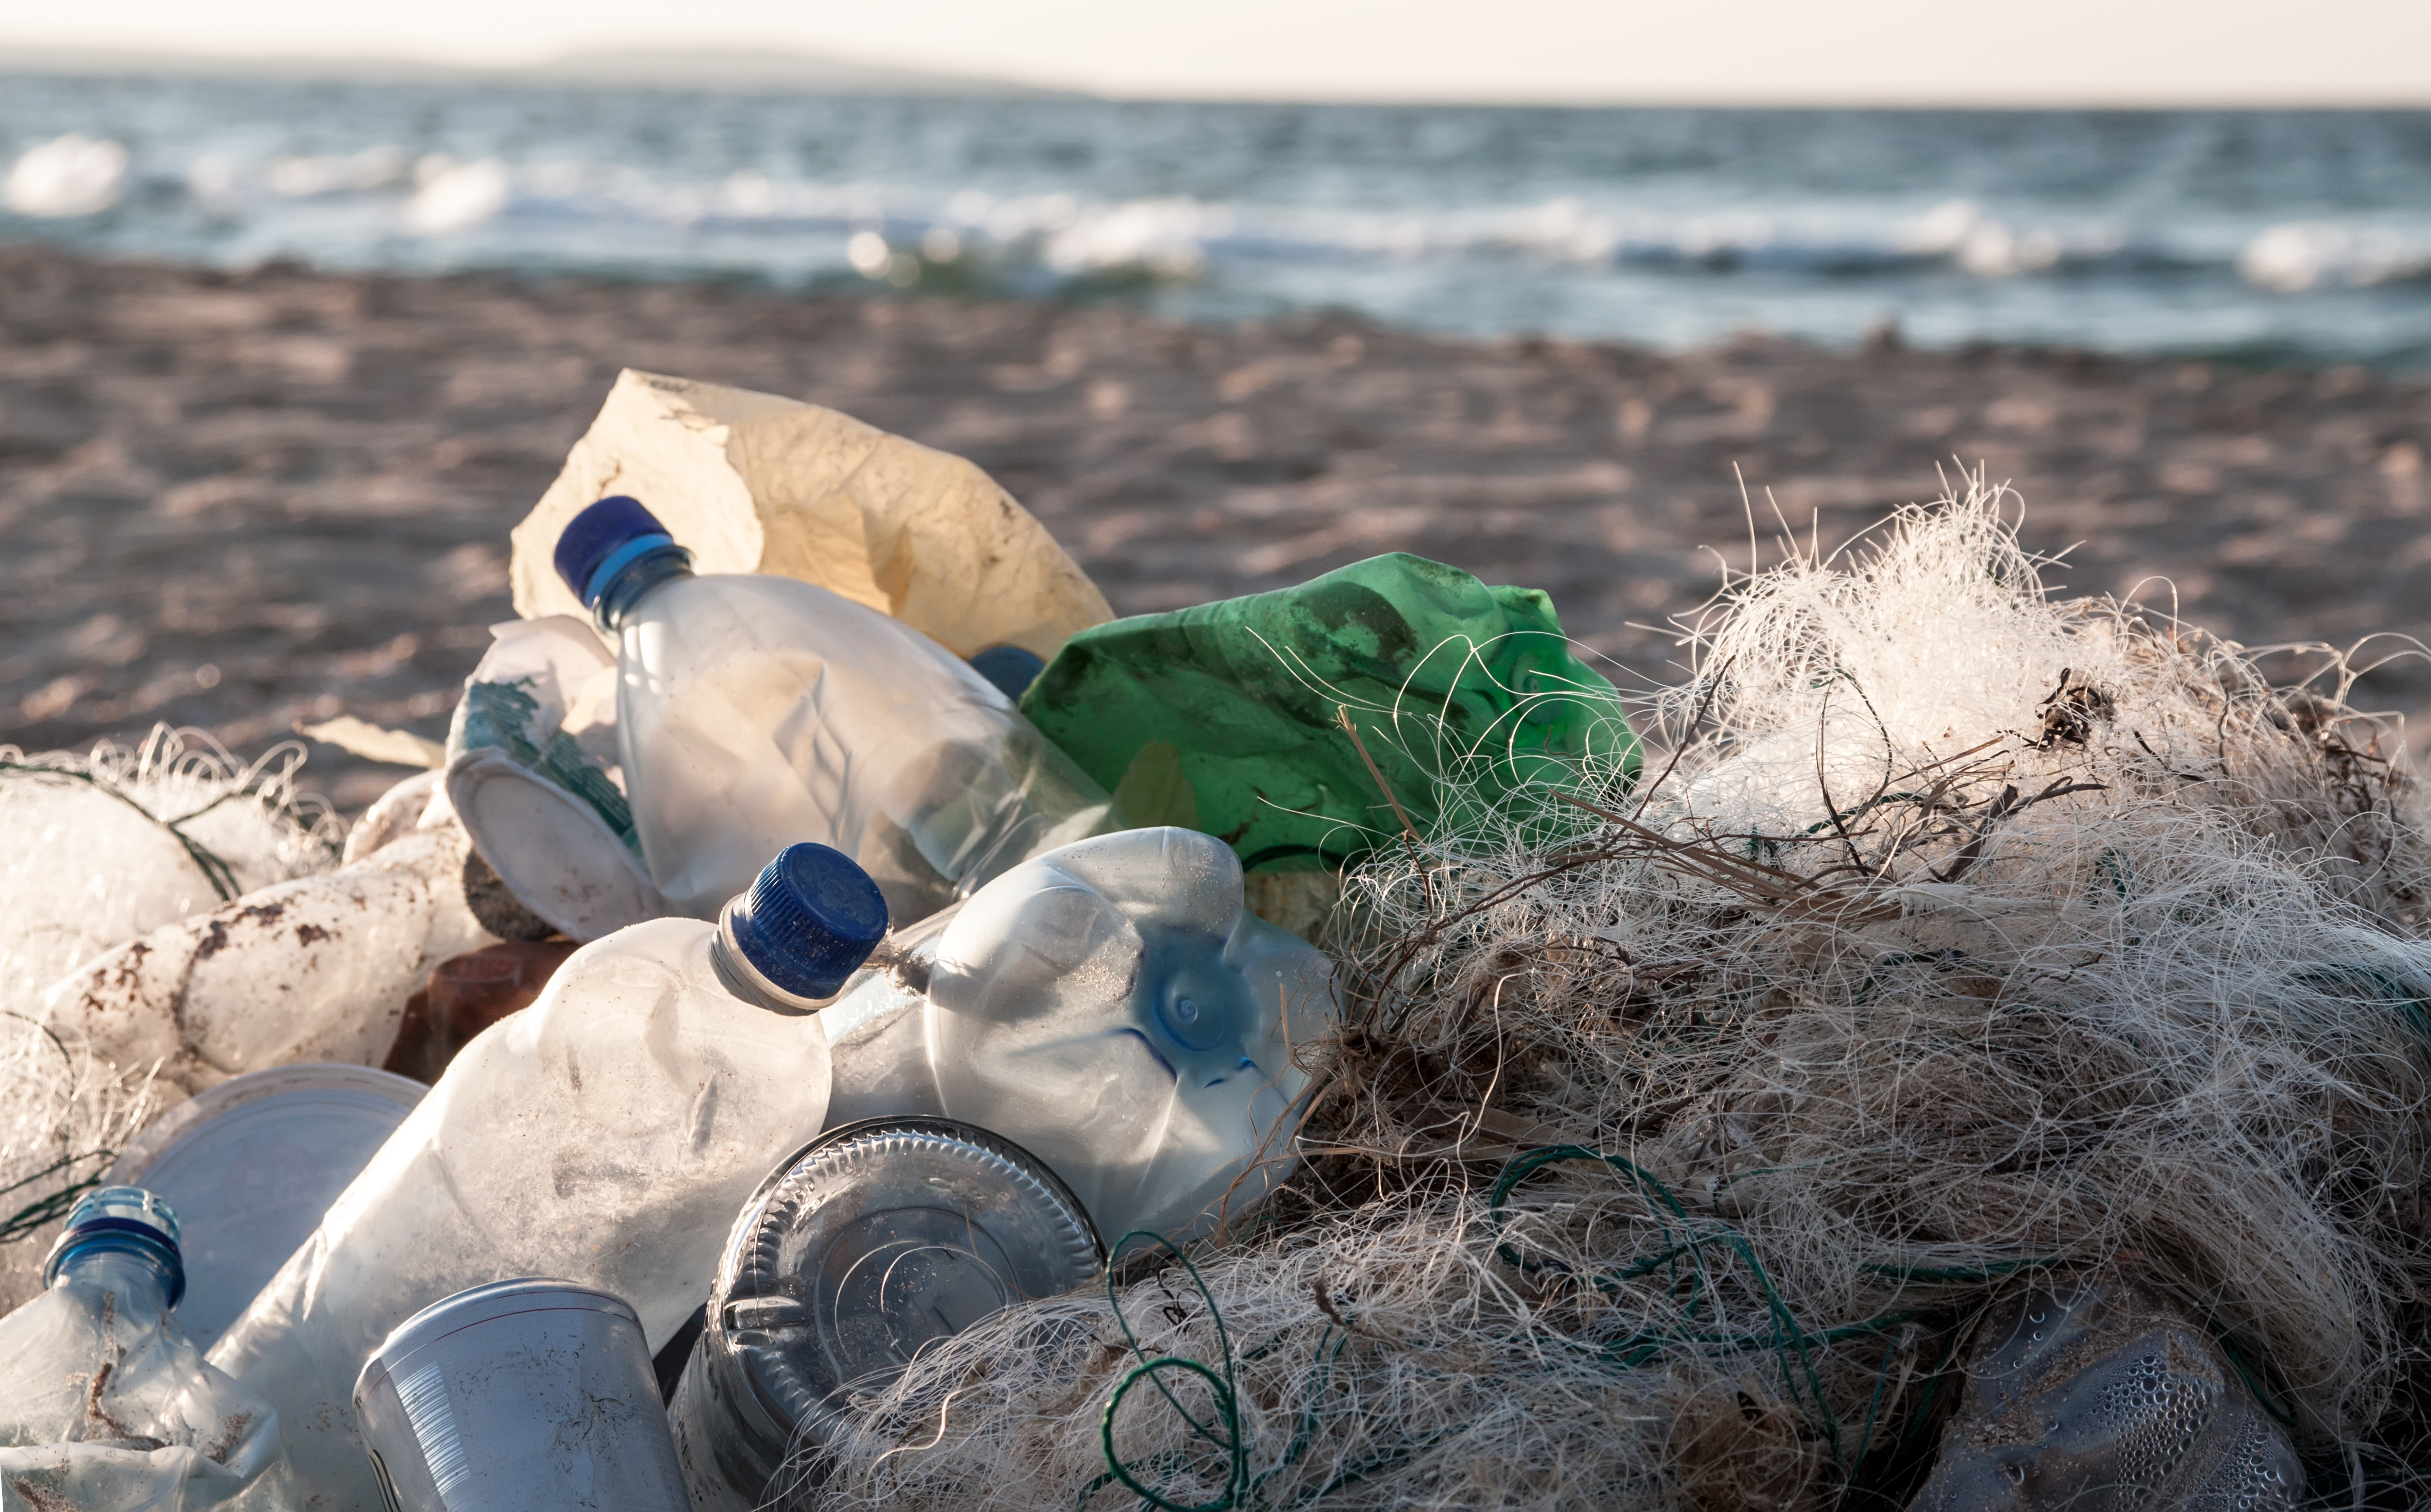 Scientists calculate impact of Chinaâs ban on plastic waste imports - UGA Today